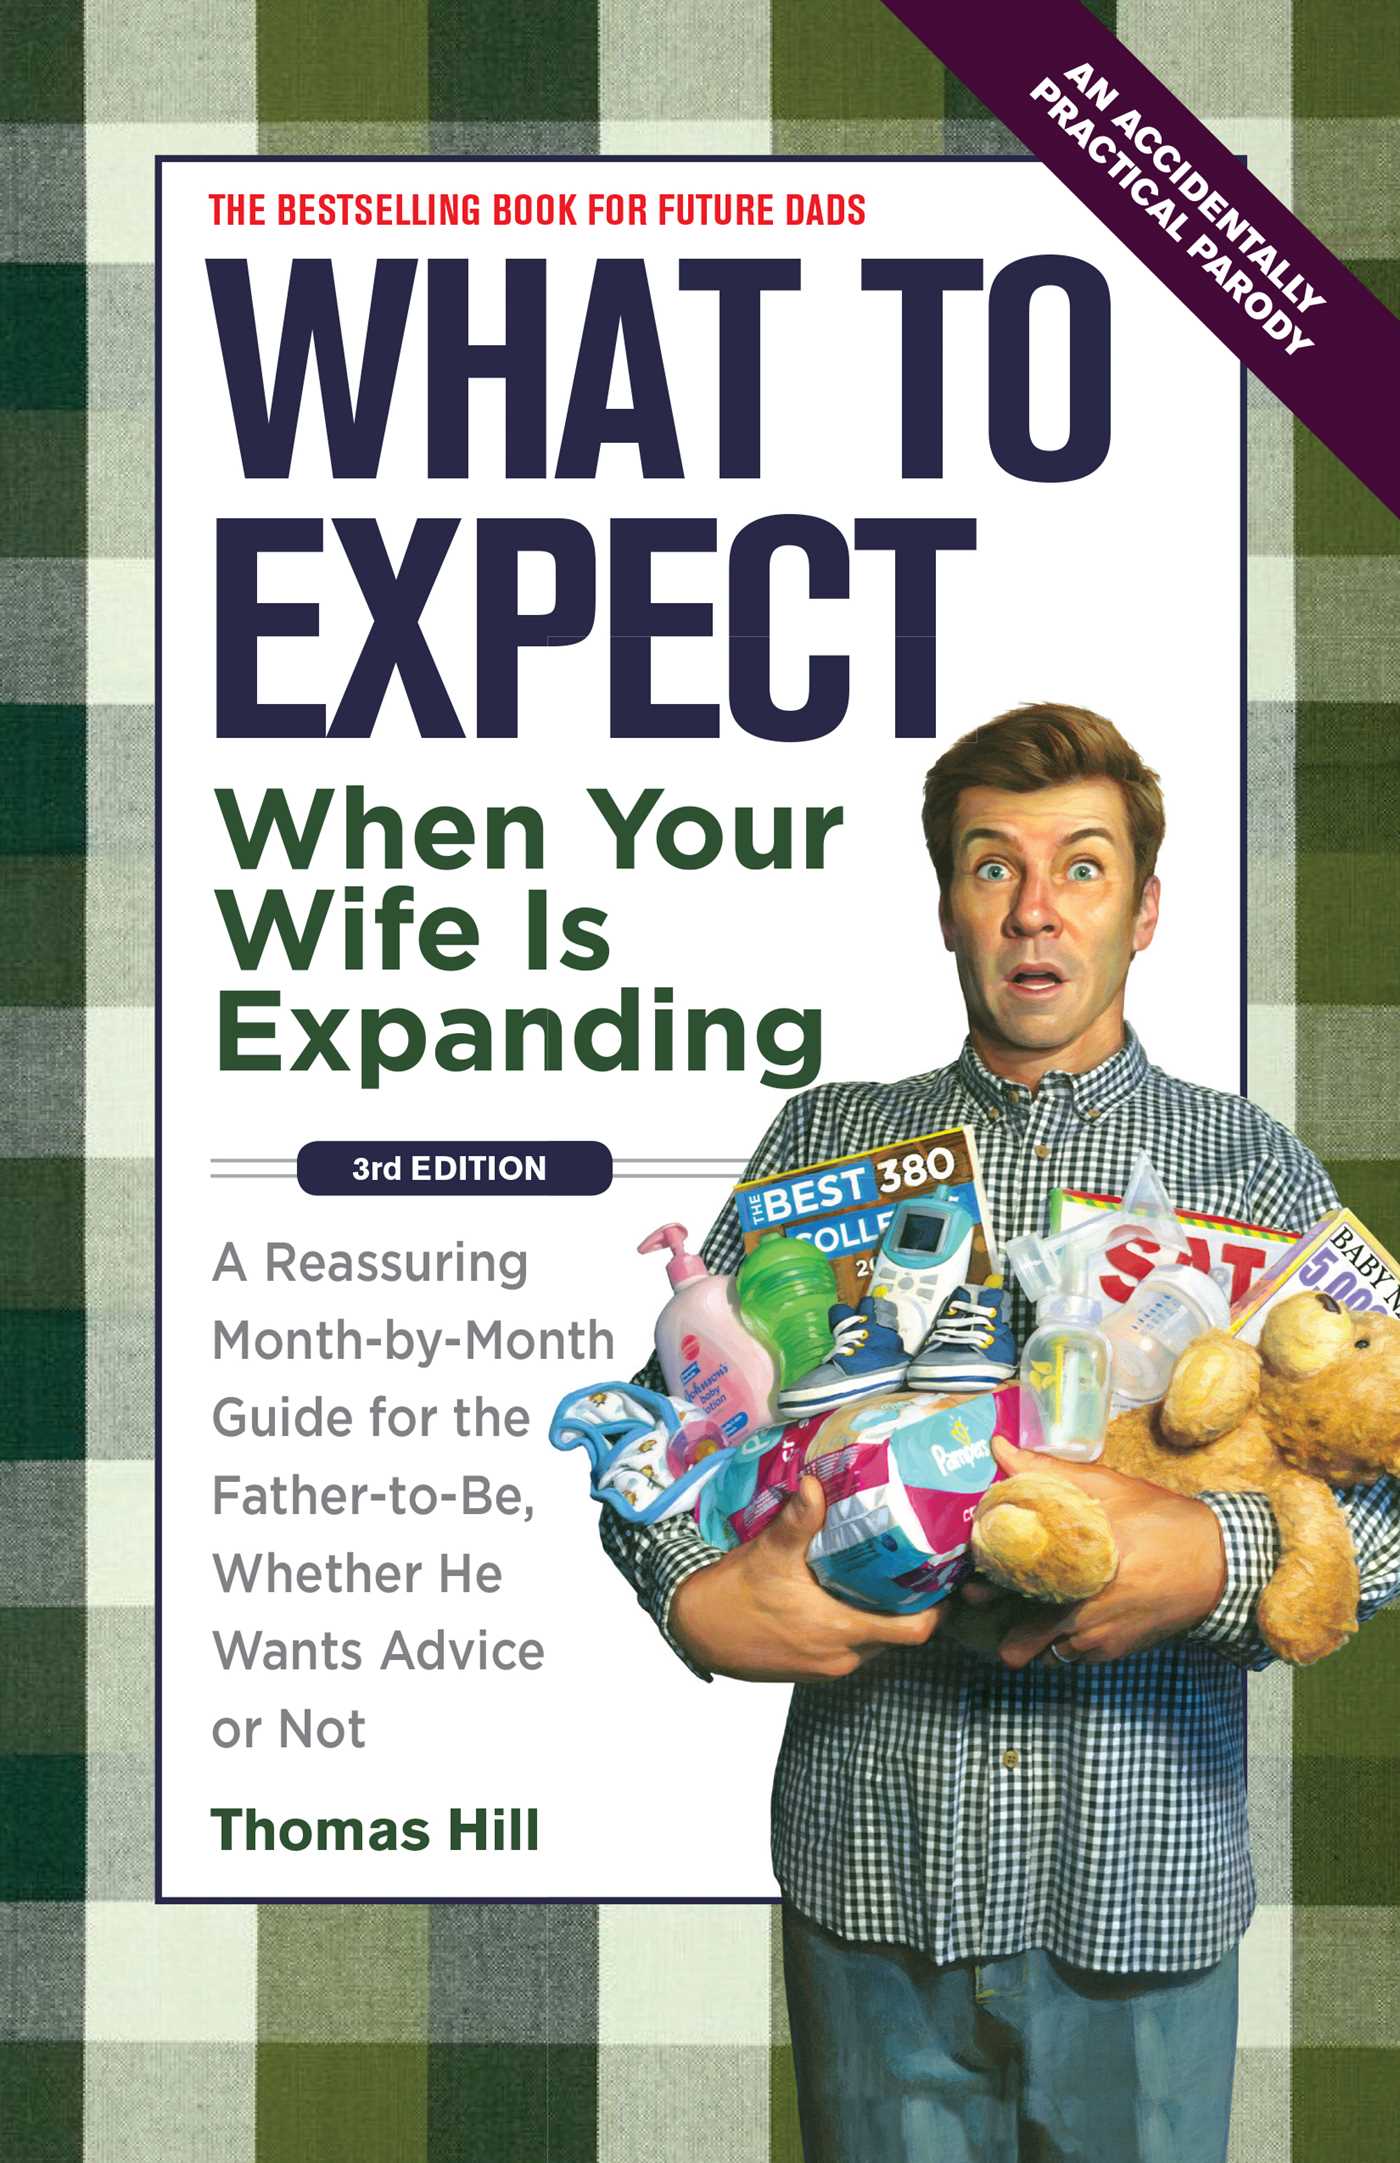 What to Expect When Your Wife Is Expanding : A Reassuring Month-by-Month Guide for the Father-to-Be, Whether He Wants Advice or Not (Paperback) - image 1 of 1